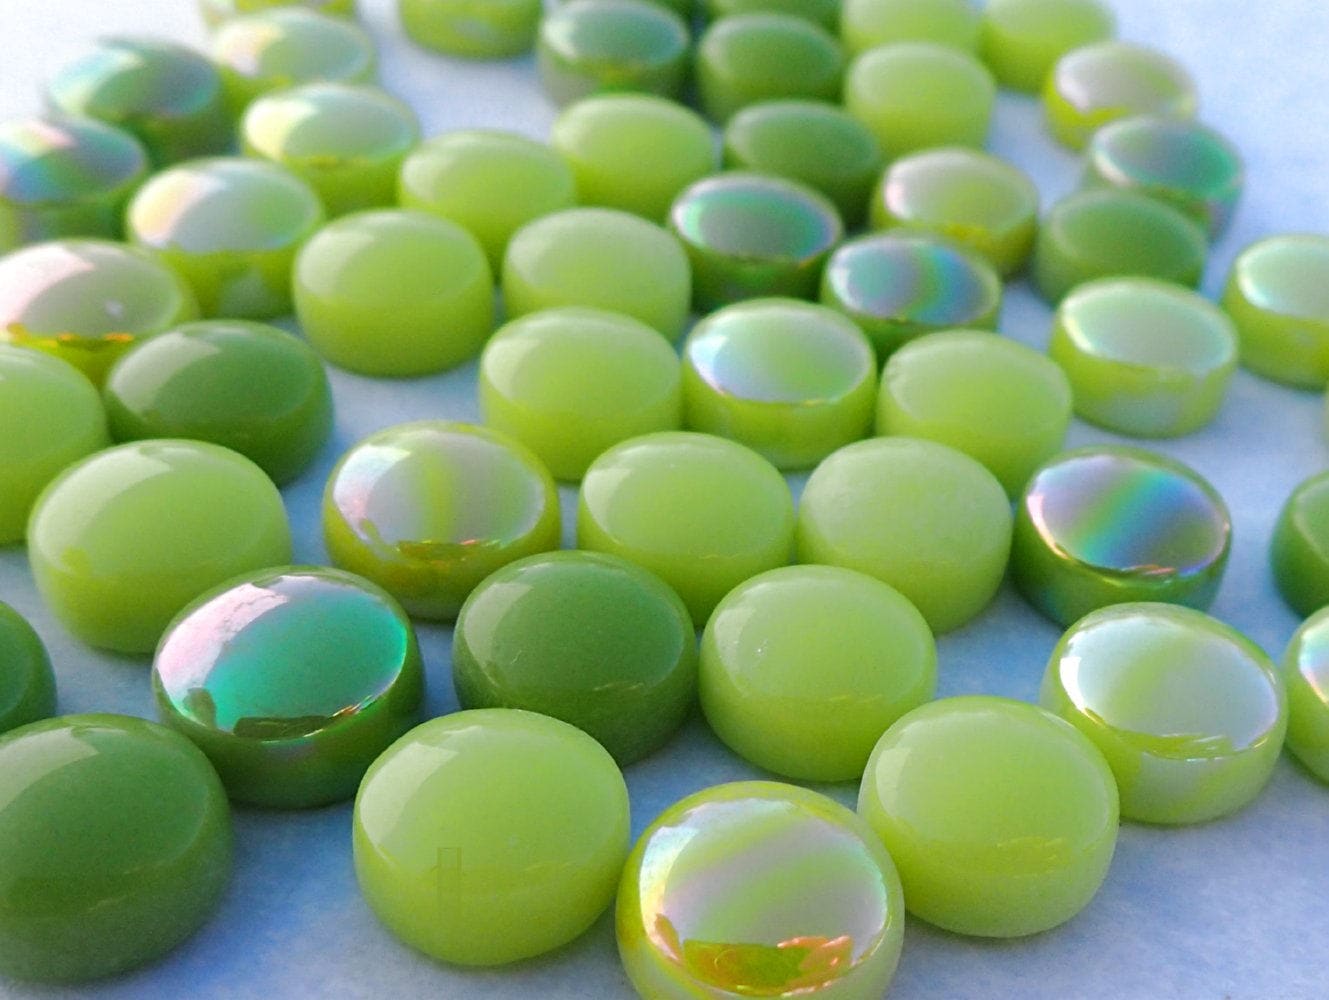 Spring Green Mix Glass Drops Mosaic Tiles - 100 grams - Mix of Gloss and Iridescent 12mm Glass Gems Light Green Yellow - Over 60